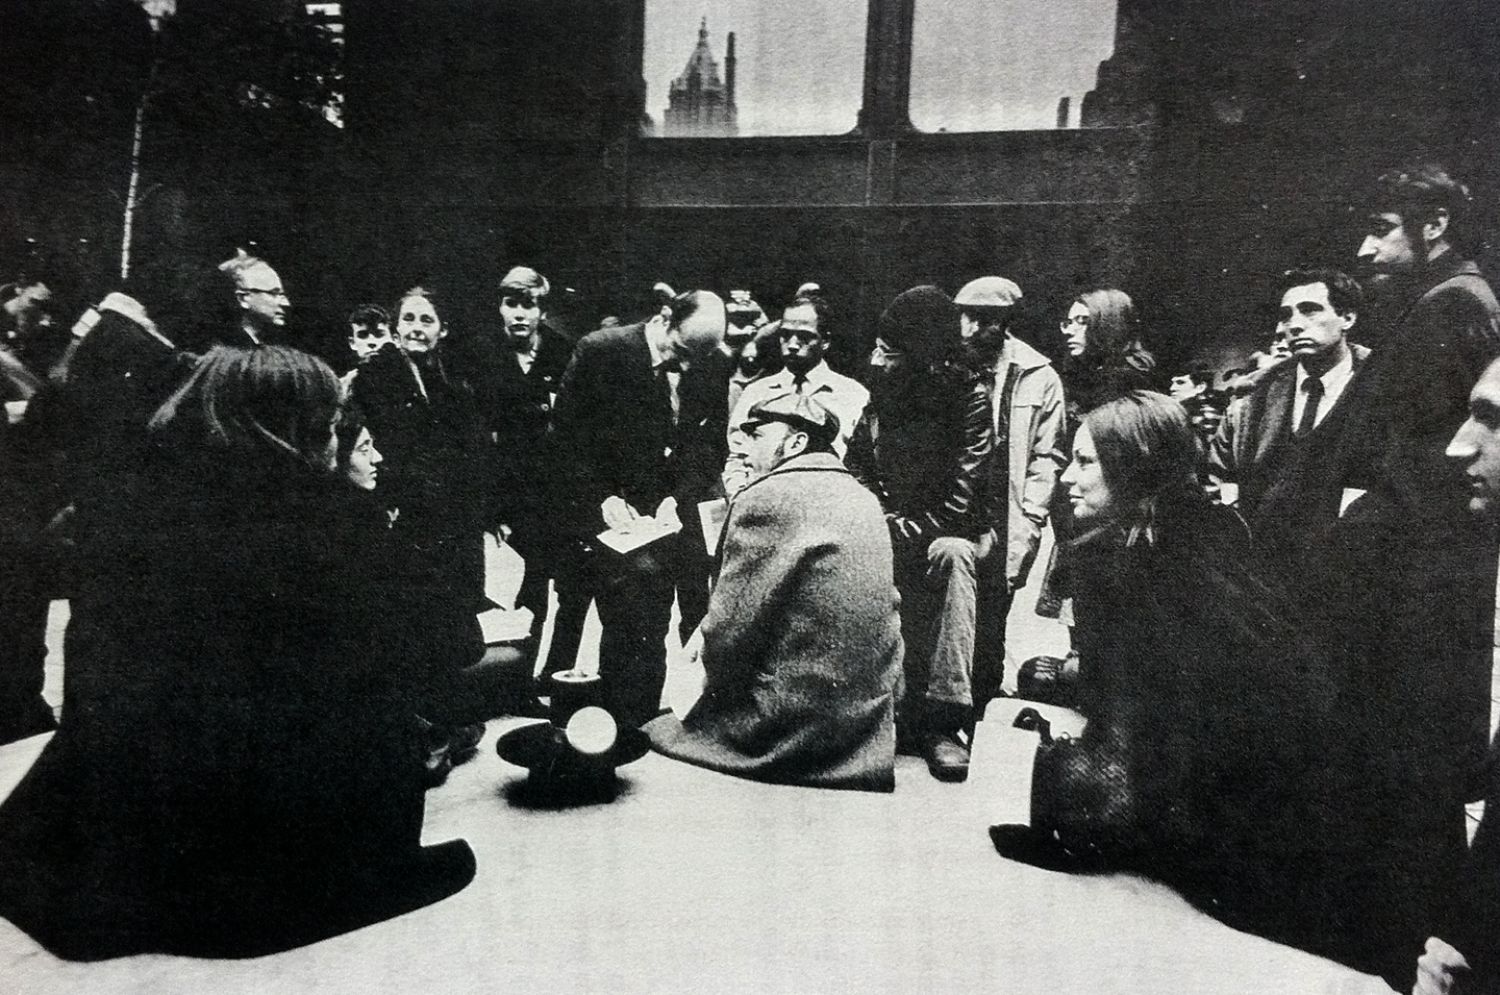 Artists attack MoMA, 1969